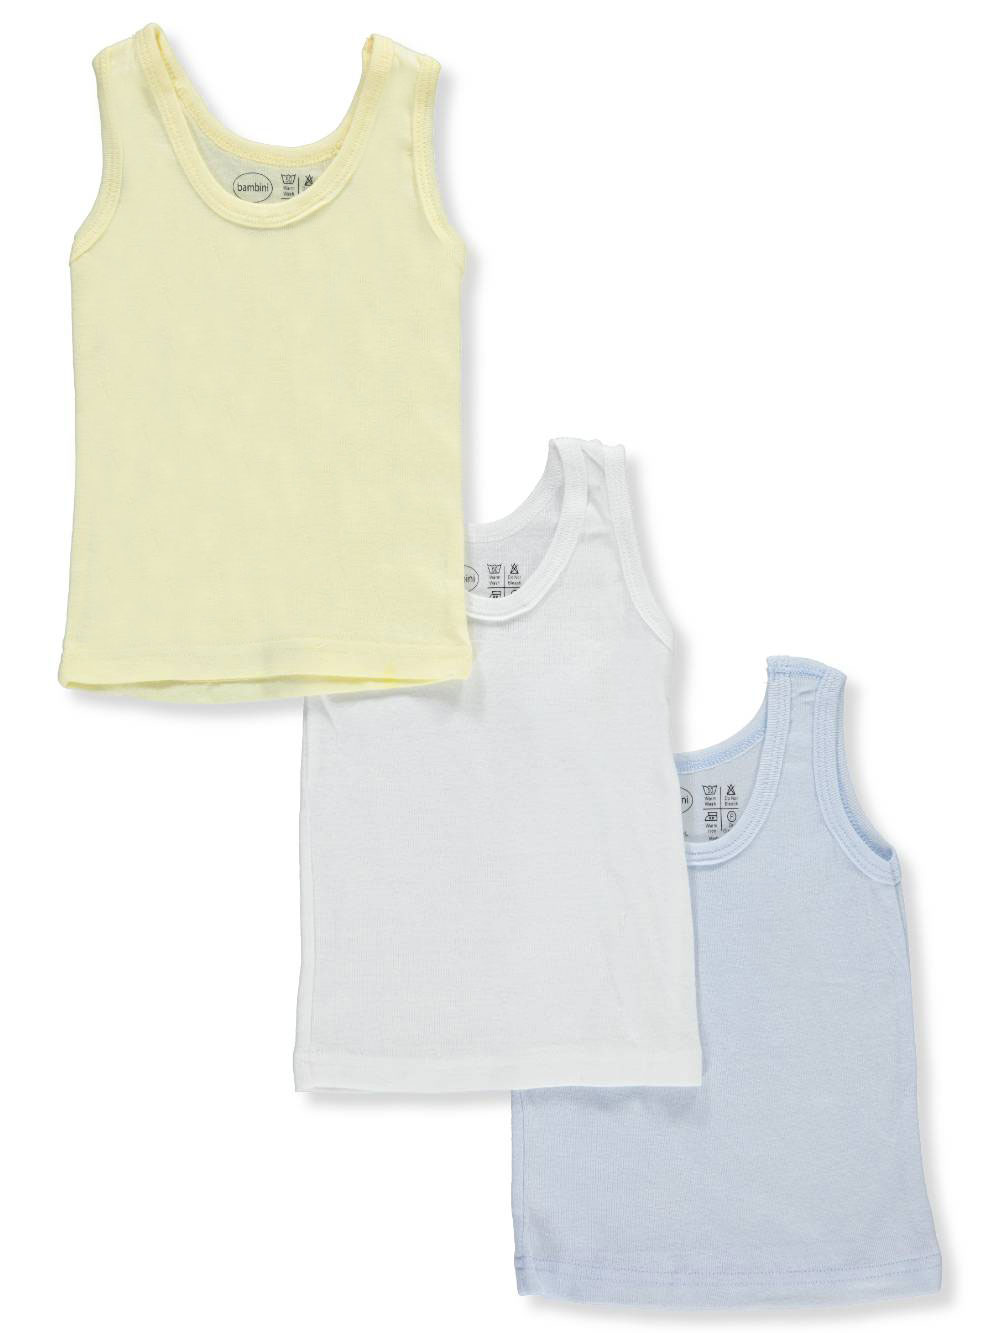 Boys Blue and White T-Shirts